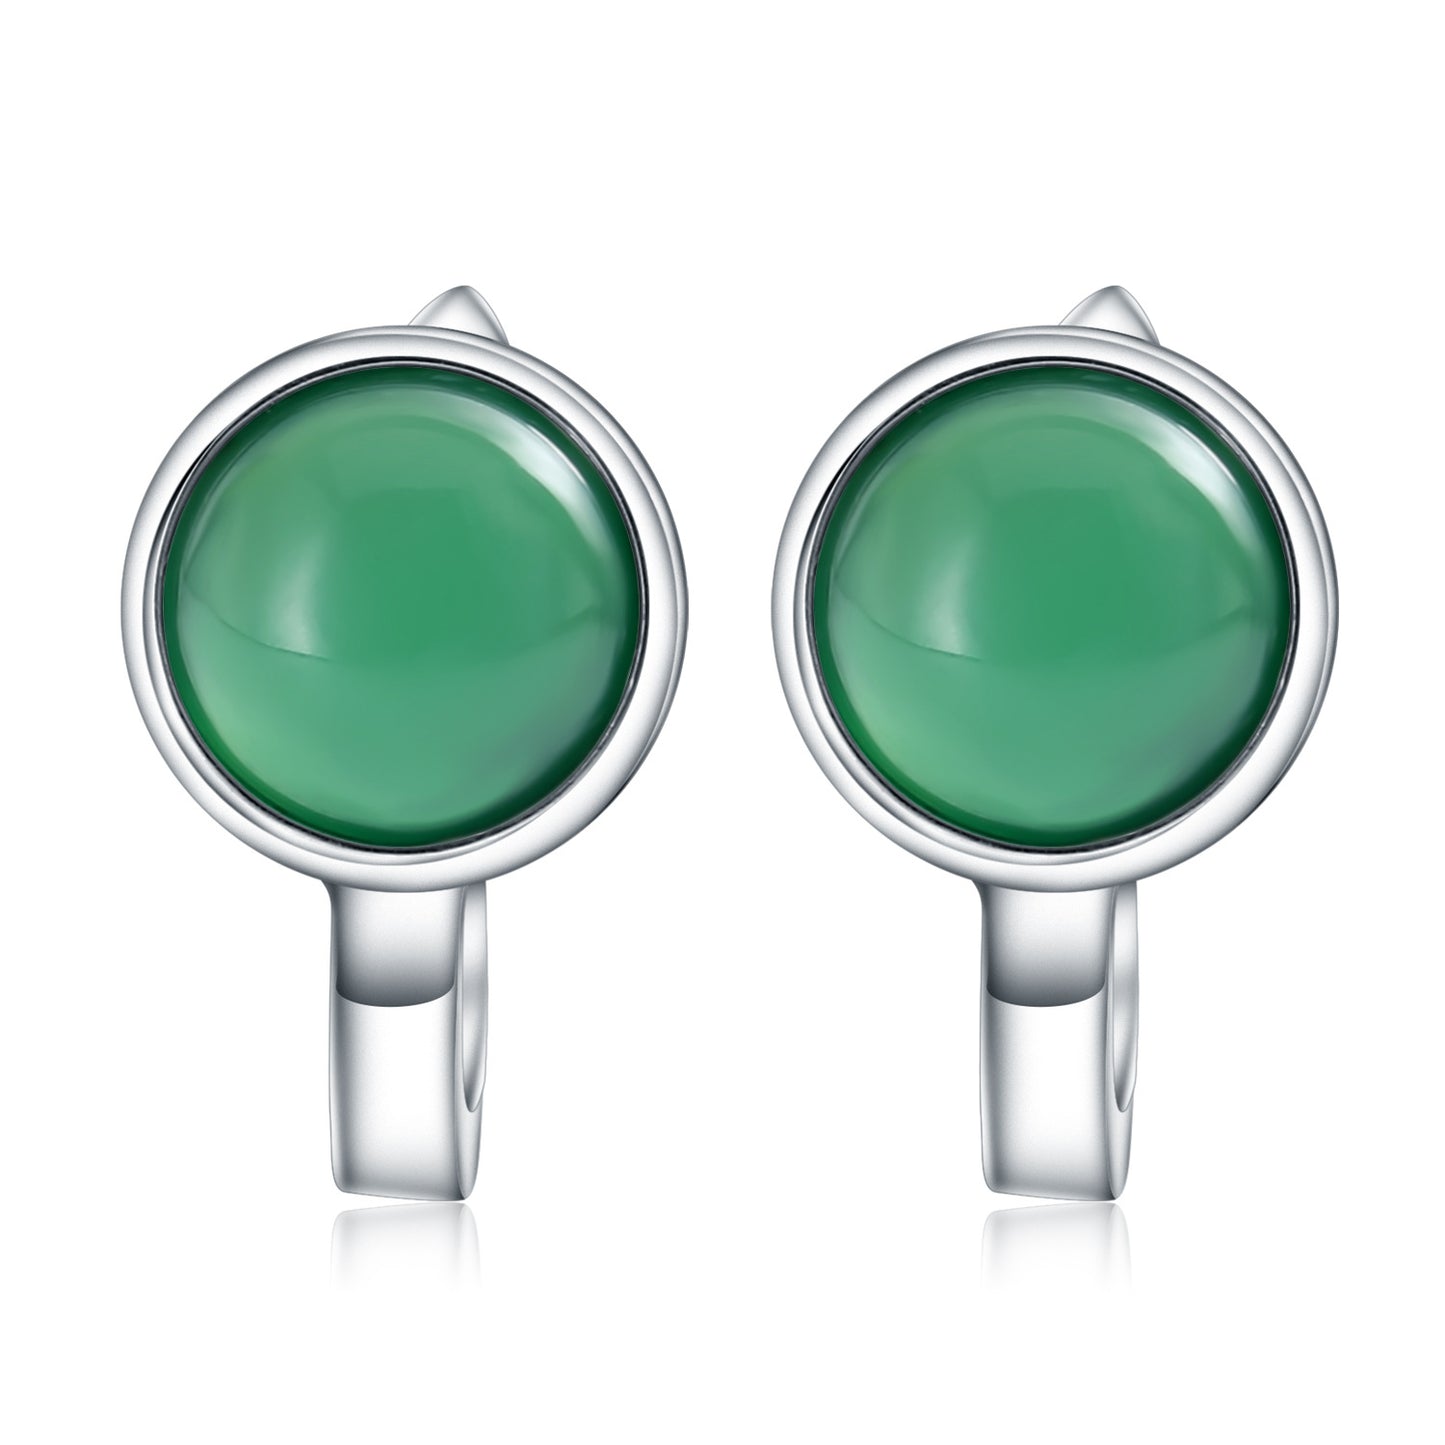 European Natural Green Agate Solitaire Round Cut Sterling Silver Studs Earrings for Women